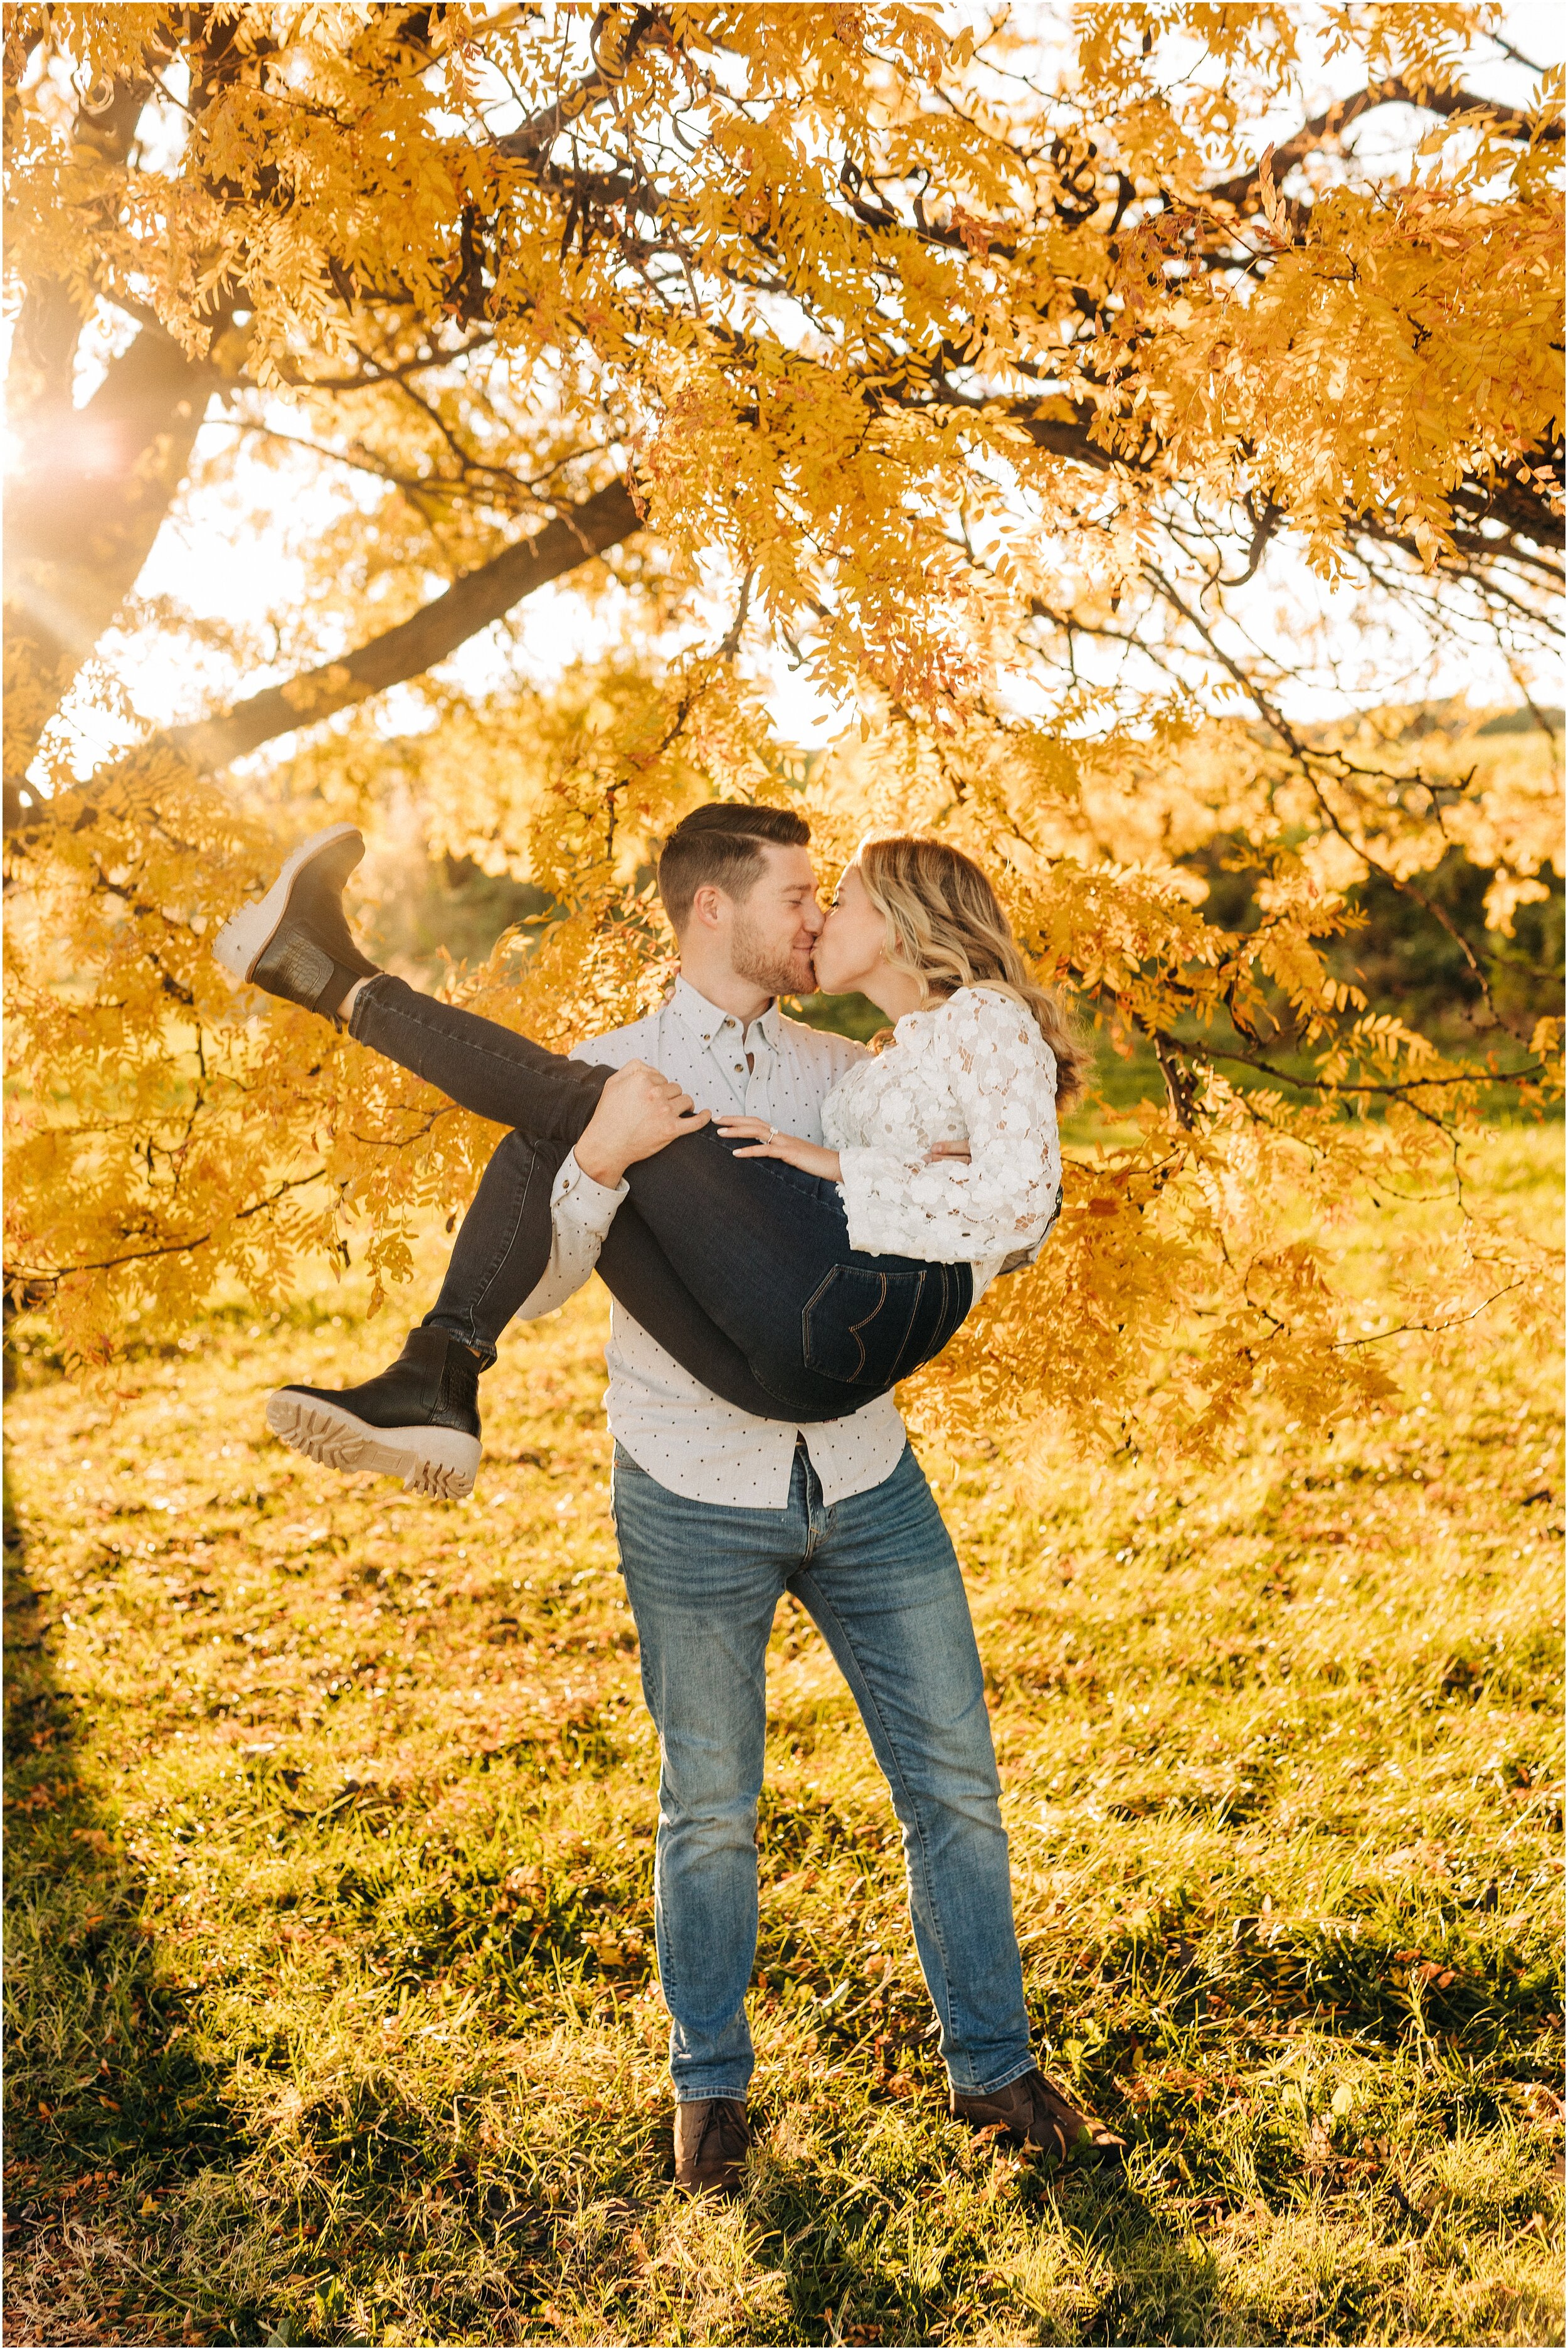 hannah leigh photography Baltimore City Maryland October Engagement Session_7059.jpg